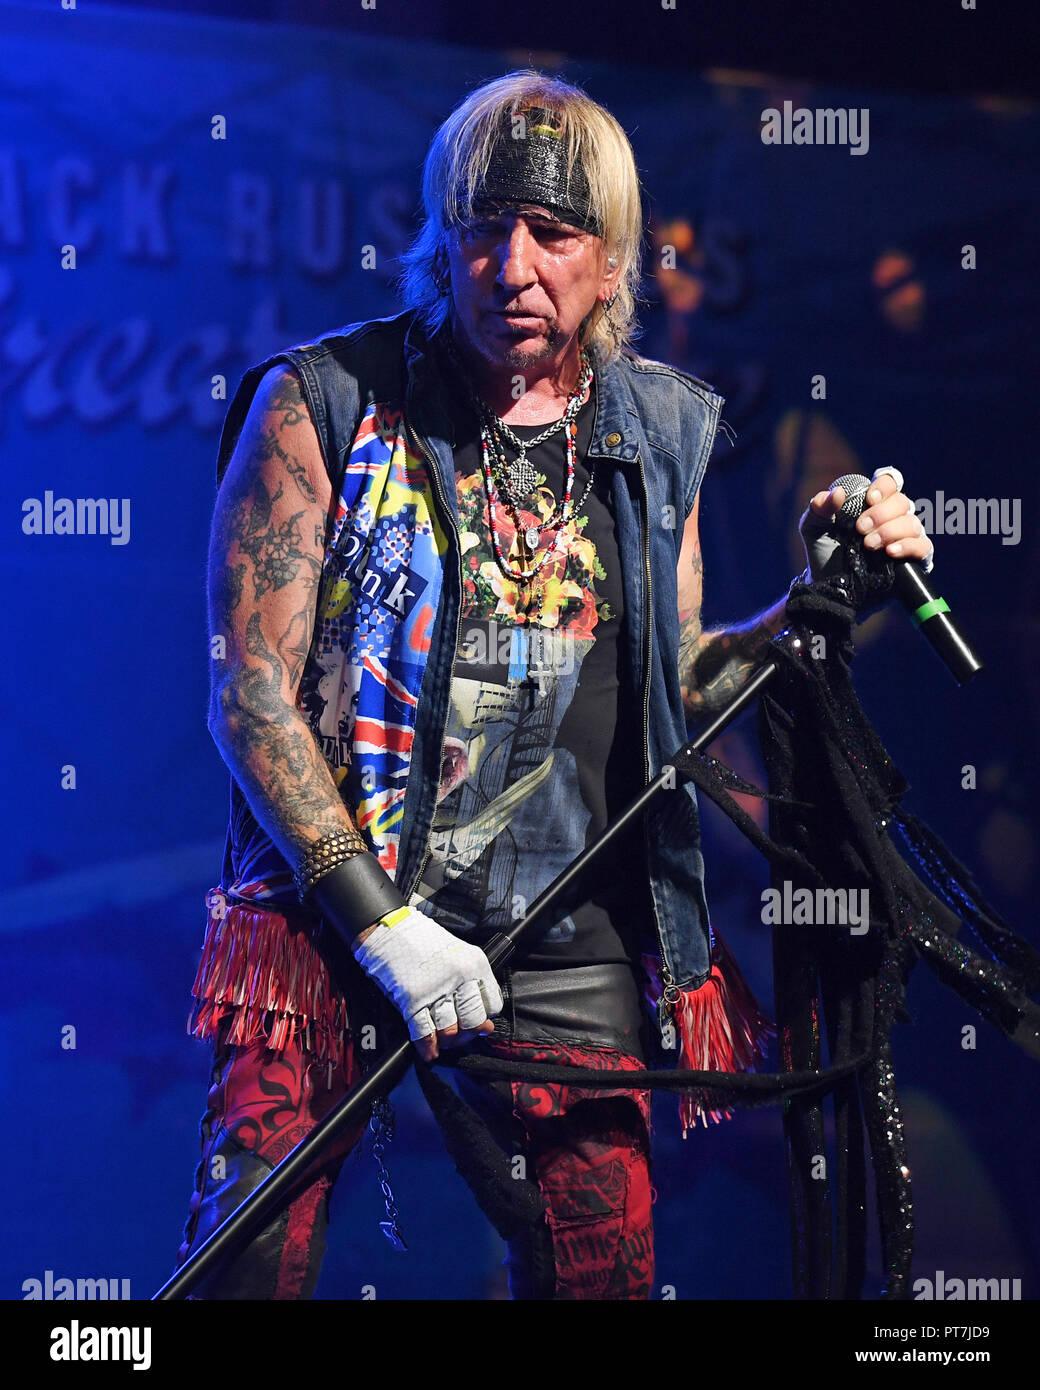 Fort Lauderdale FL, USA. 06th Oct, 2018. Jack Russell's Great White performs during the SiriusXM Hair Nation Tour at Revolution Live on October 6, 2018 in Fort Lauderdale, Florida. Credit: Mpi04/Media Punch/Alamy Live News Stock Photo